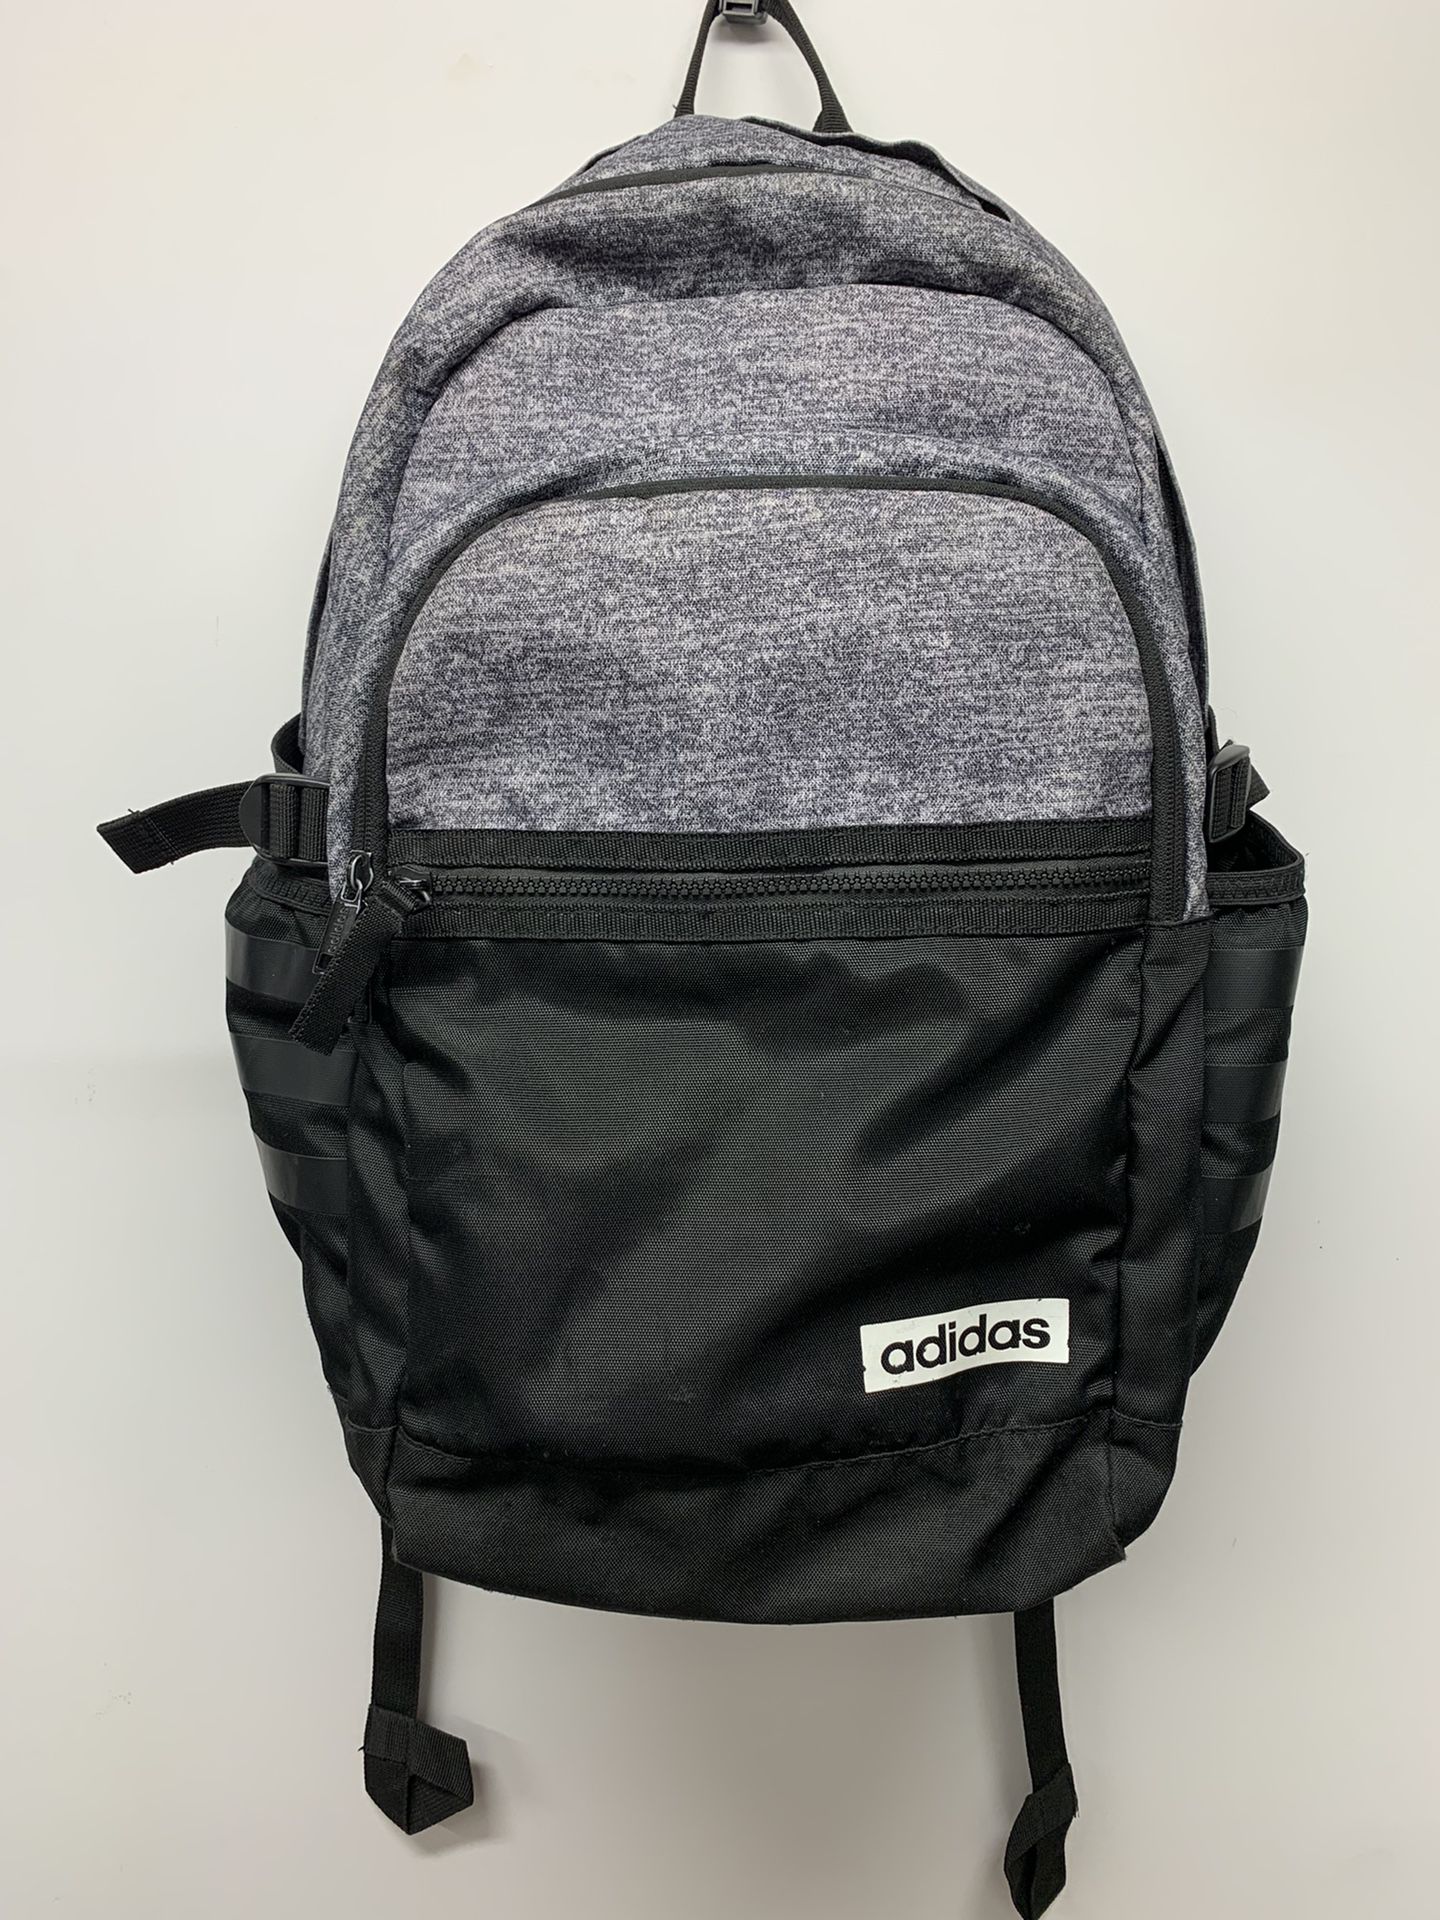 Adidas Core Advantage II Backpack in Grey/Black Holds 15.4” Laptop 4 Pockets. 